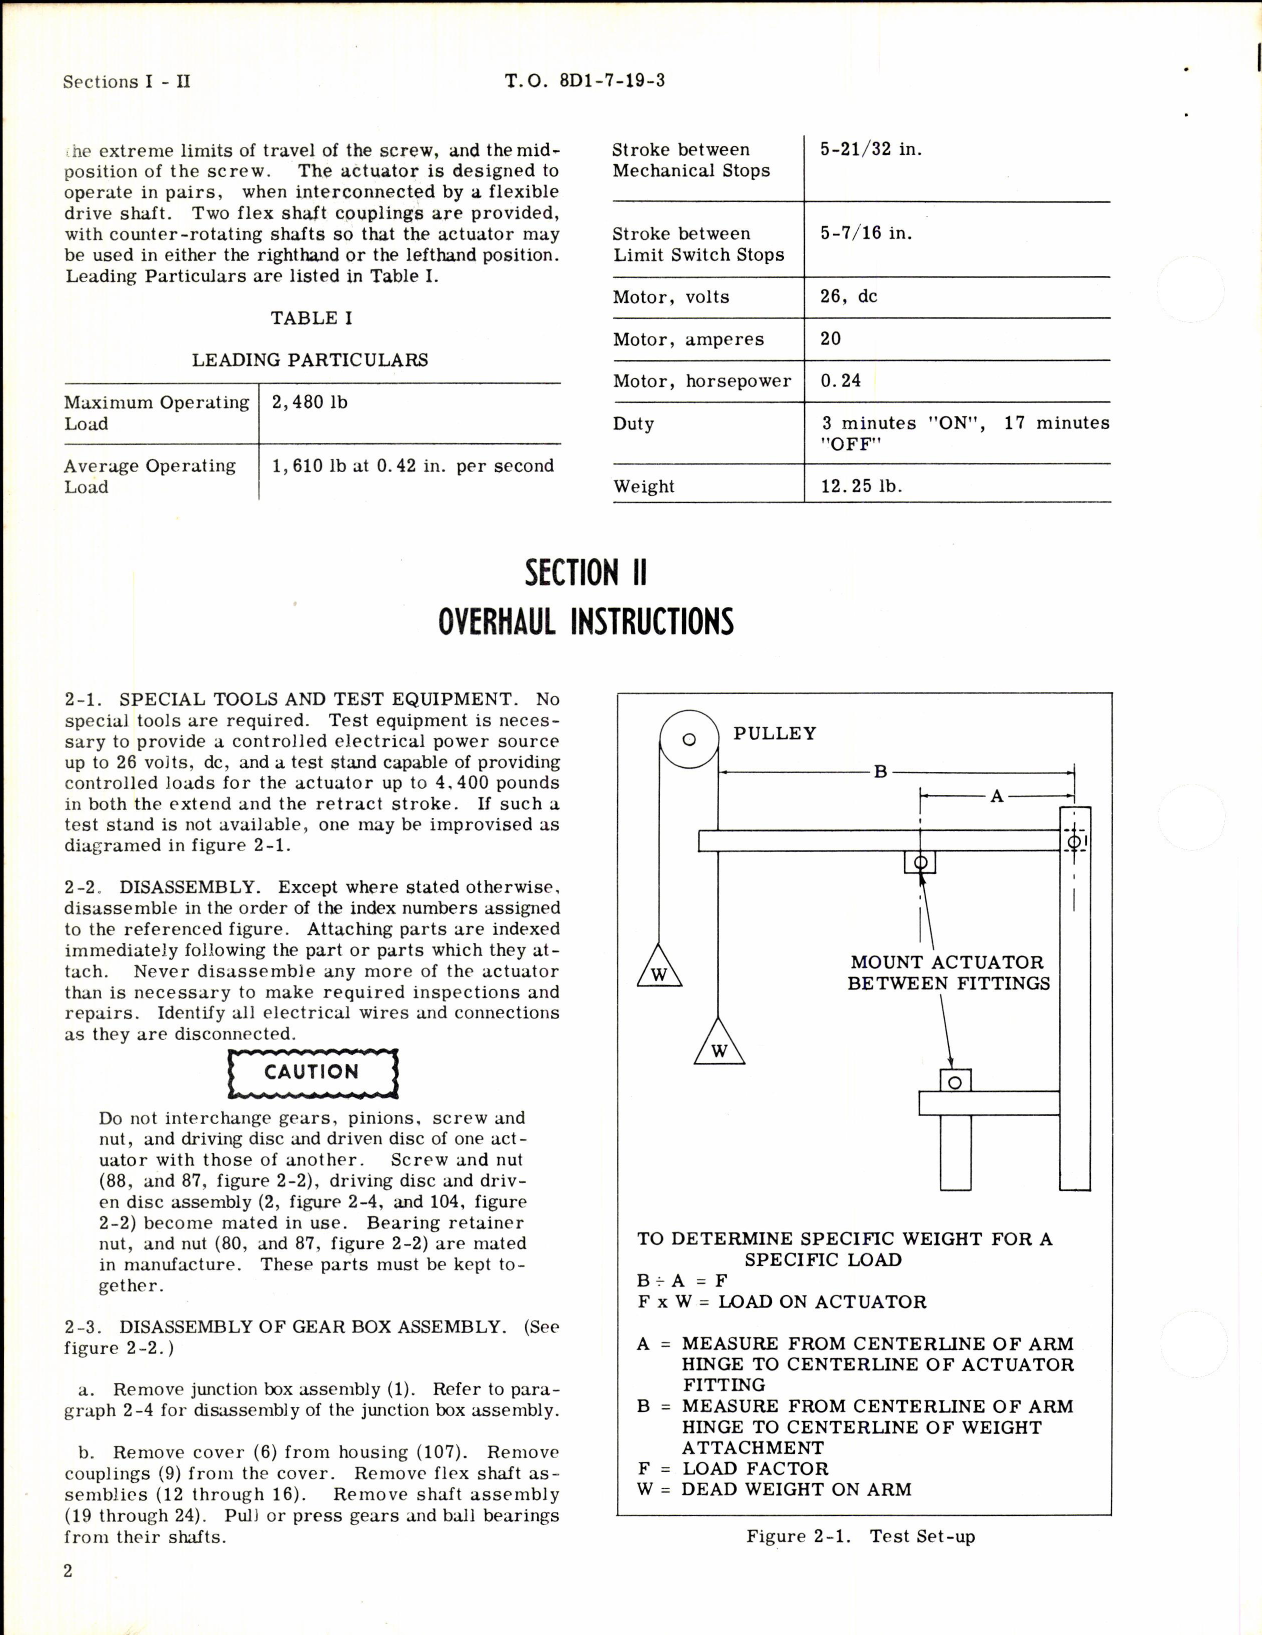 Sample page 4 from AirCorps Library document: Instructions for Wing Flap Actuator Part No D1390